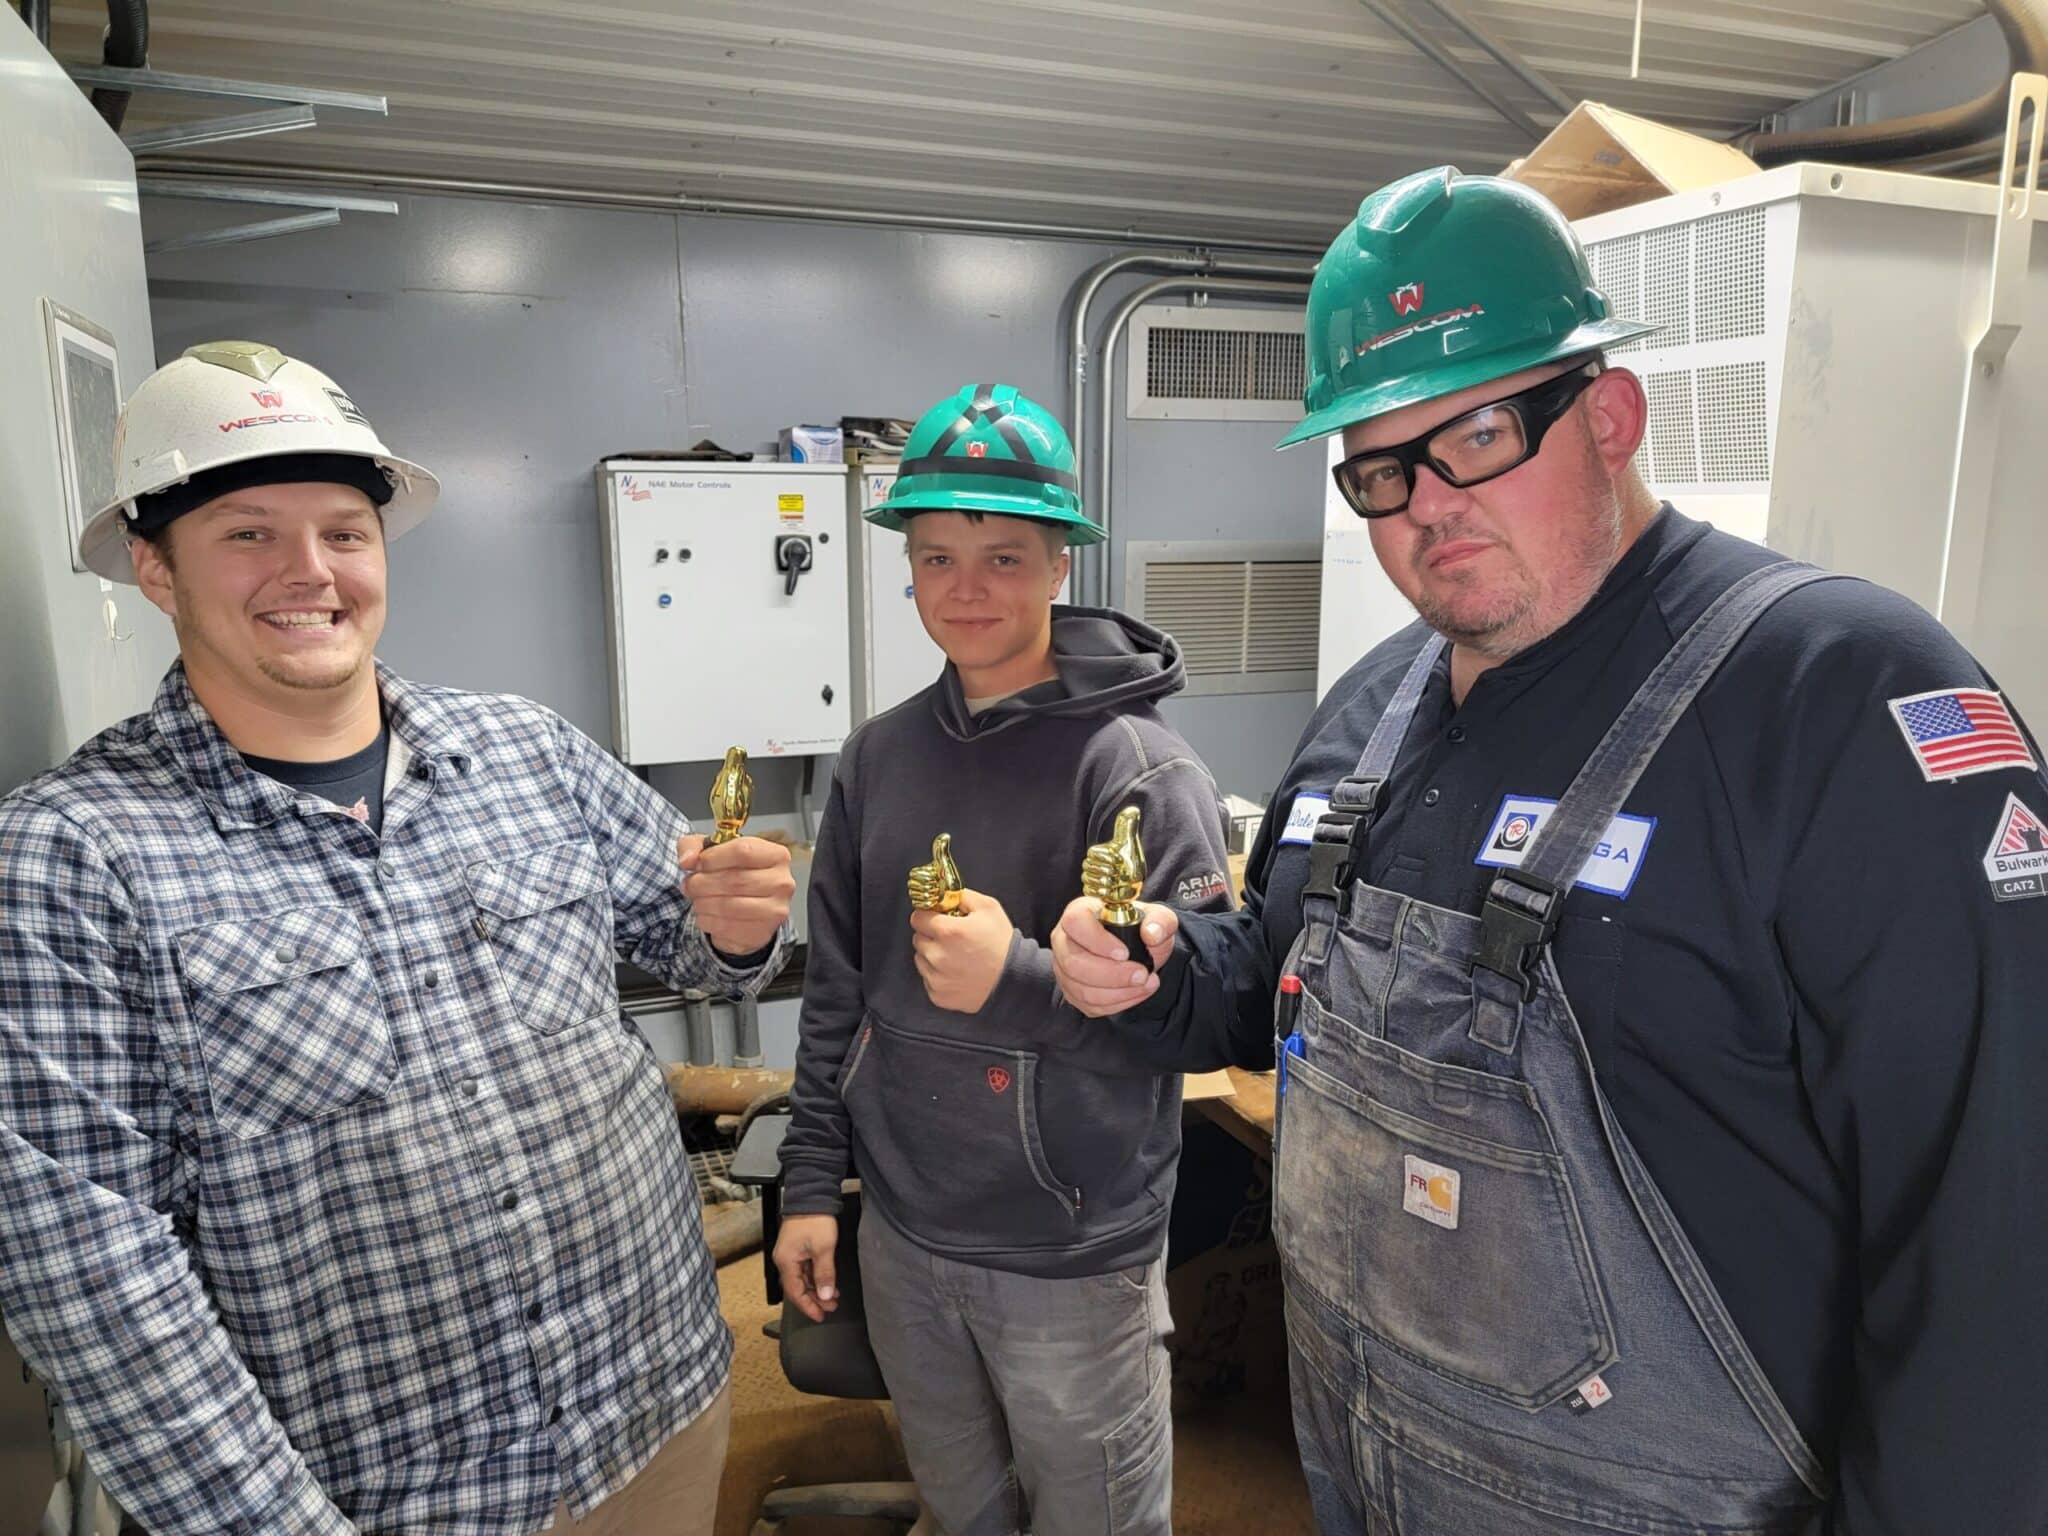 For values post, three men standing at work while wearing wescom apparel and hard hats and holding trophies